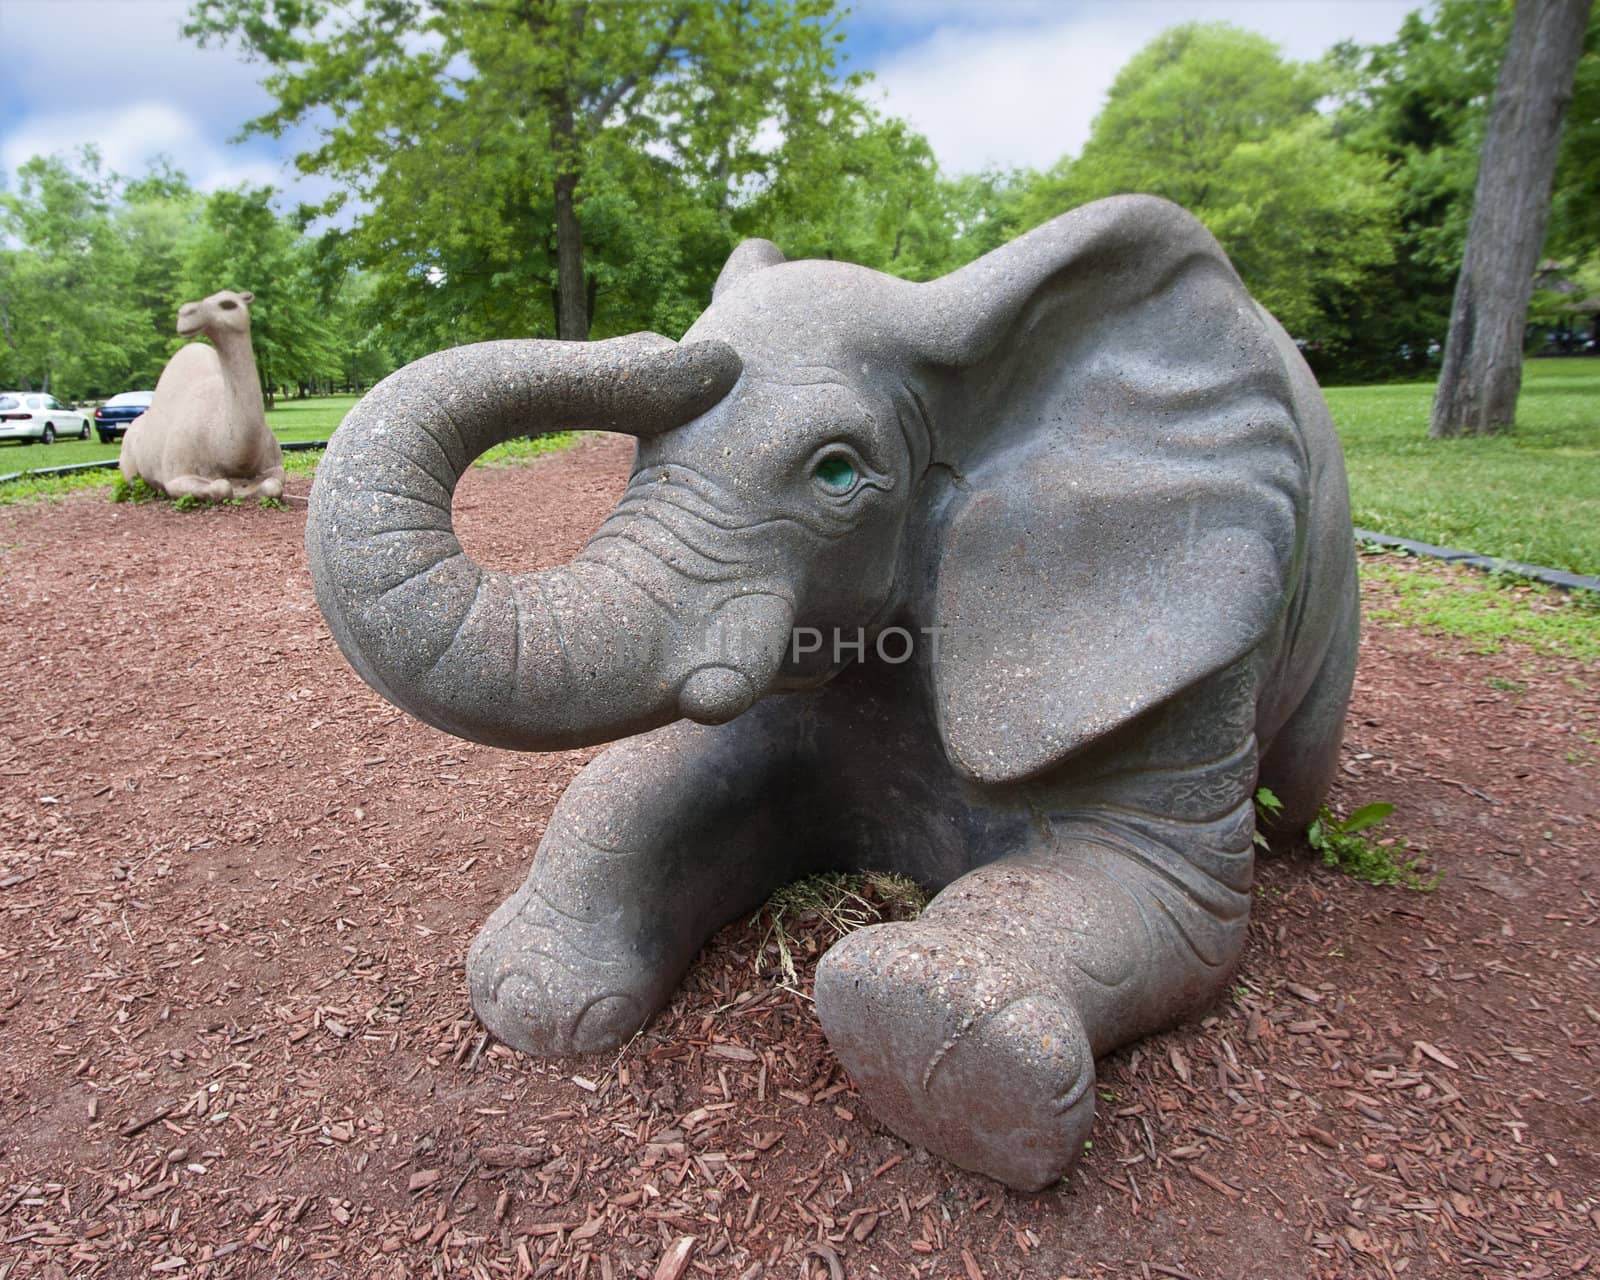 A large elephant statue in a children's playground 